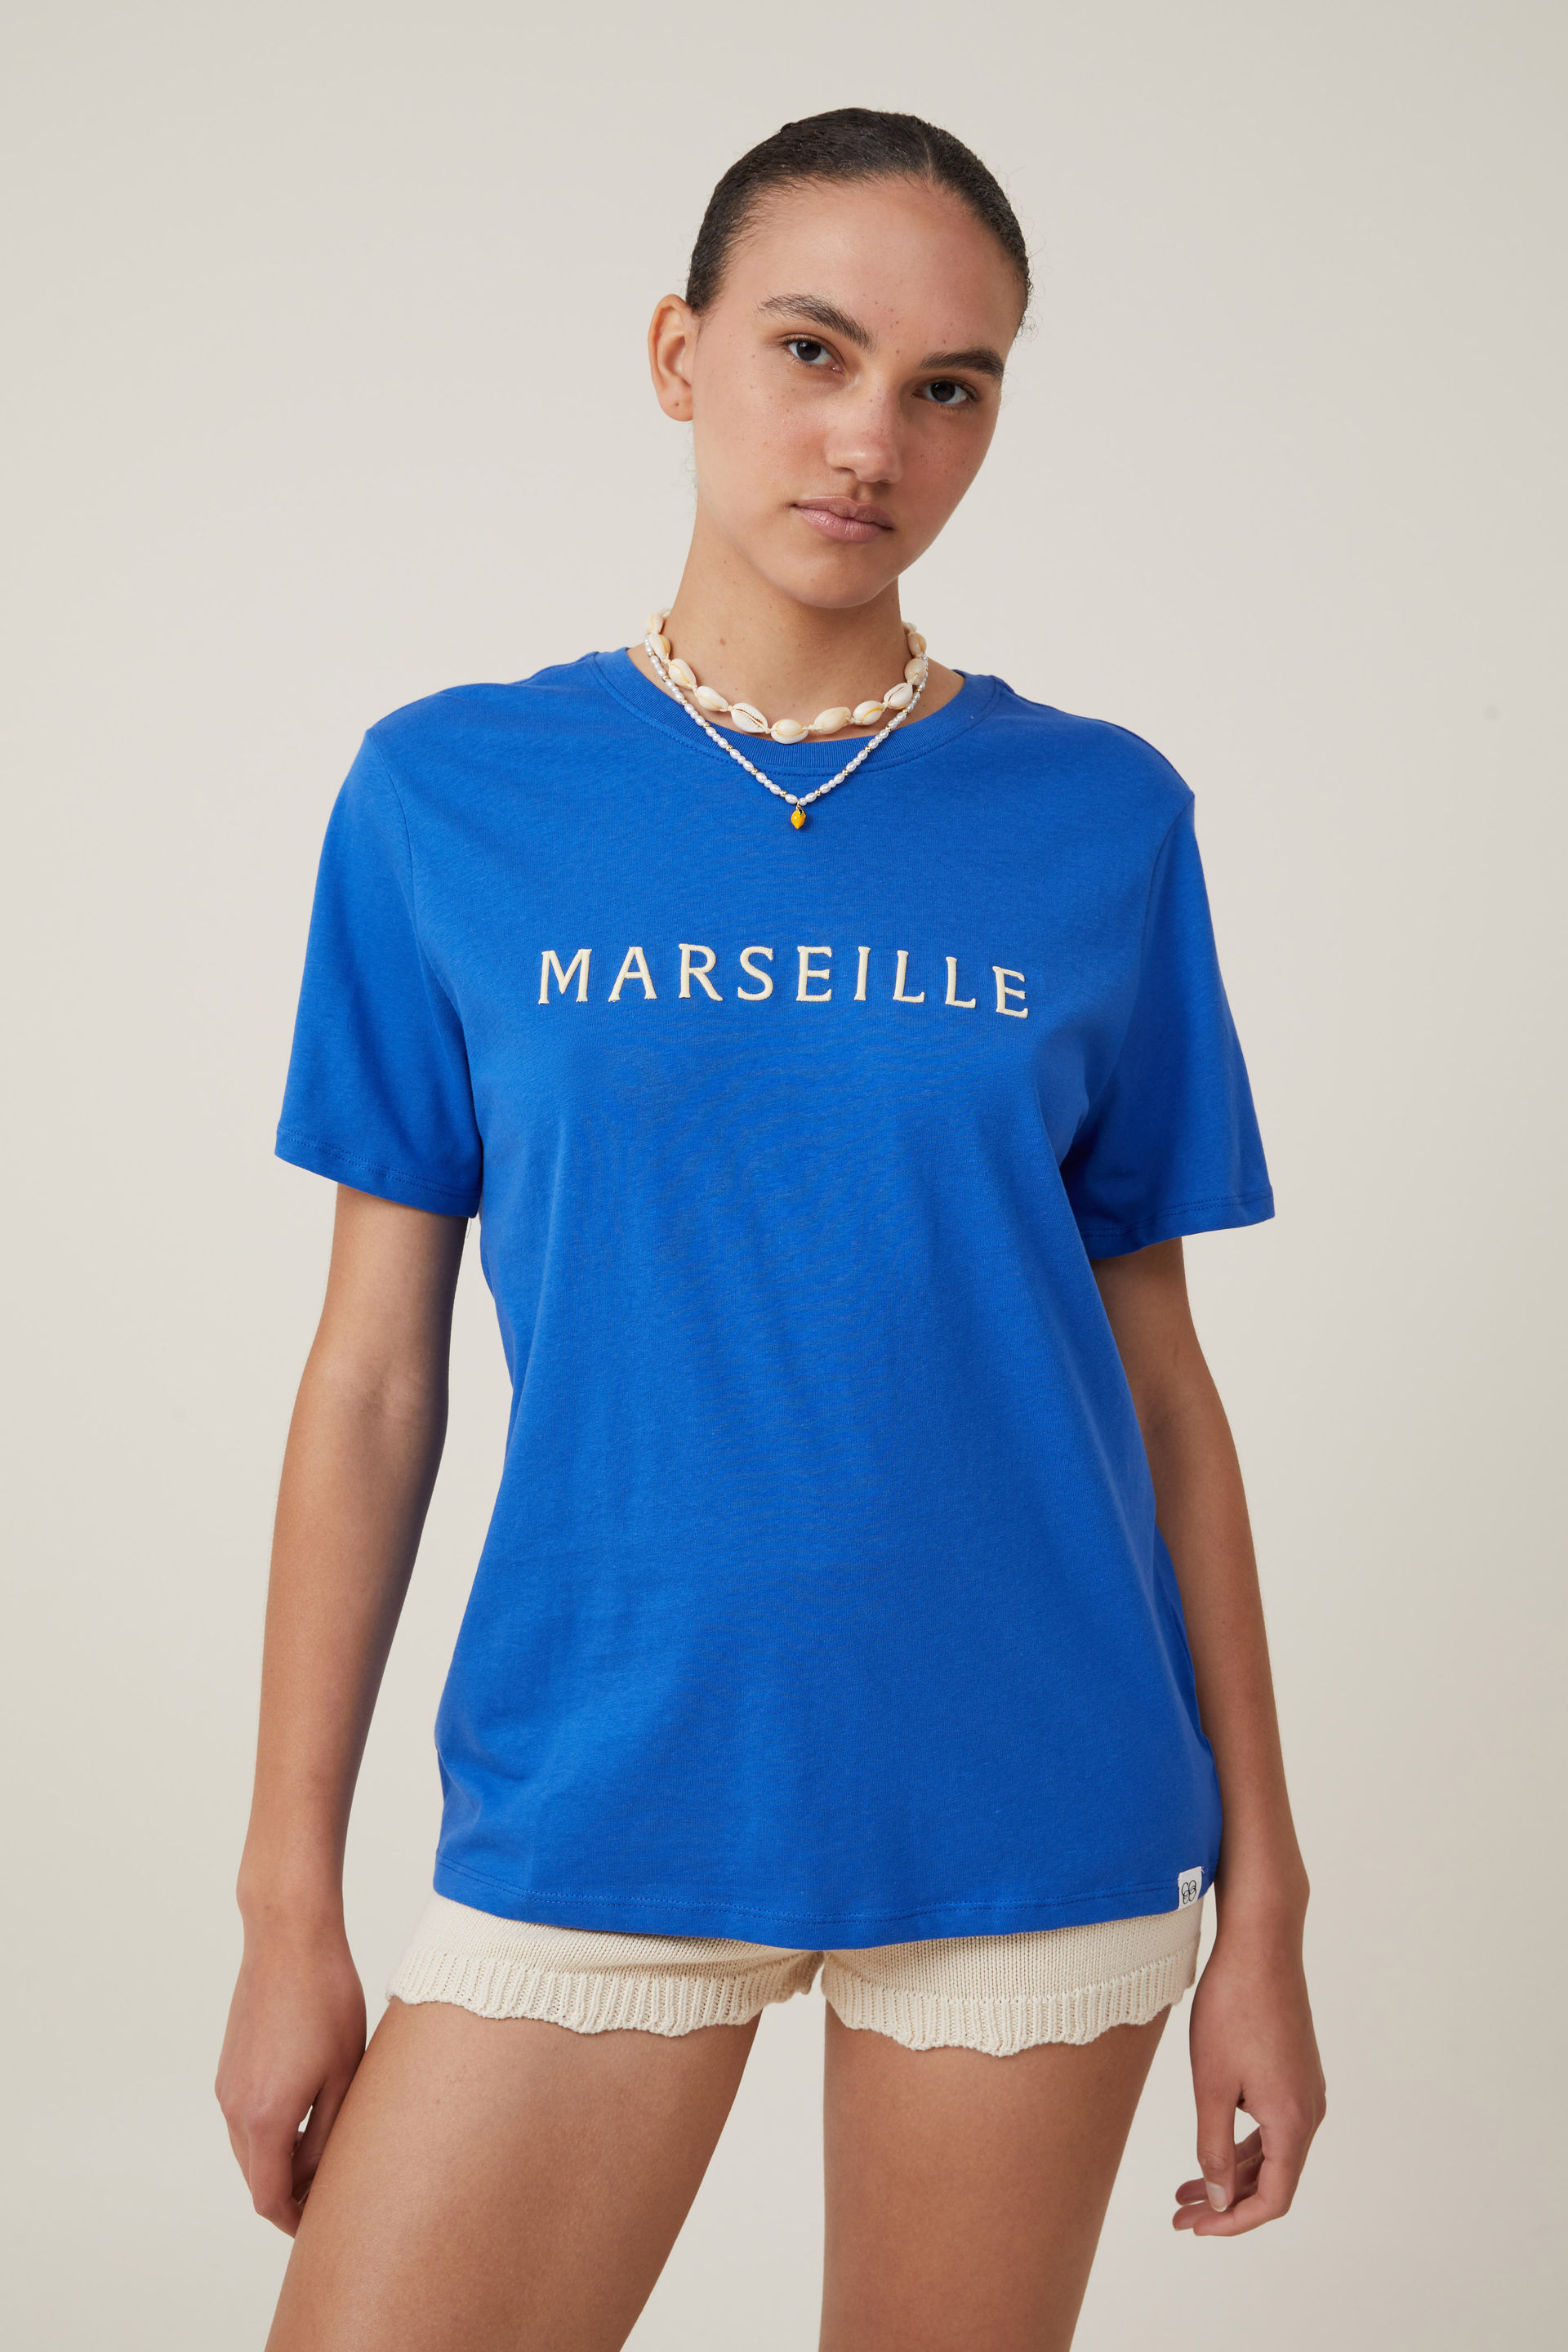 Cotton On Women - Regular Fit Graphic Tee - Marseille/ pacific blue